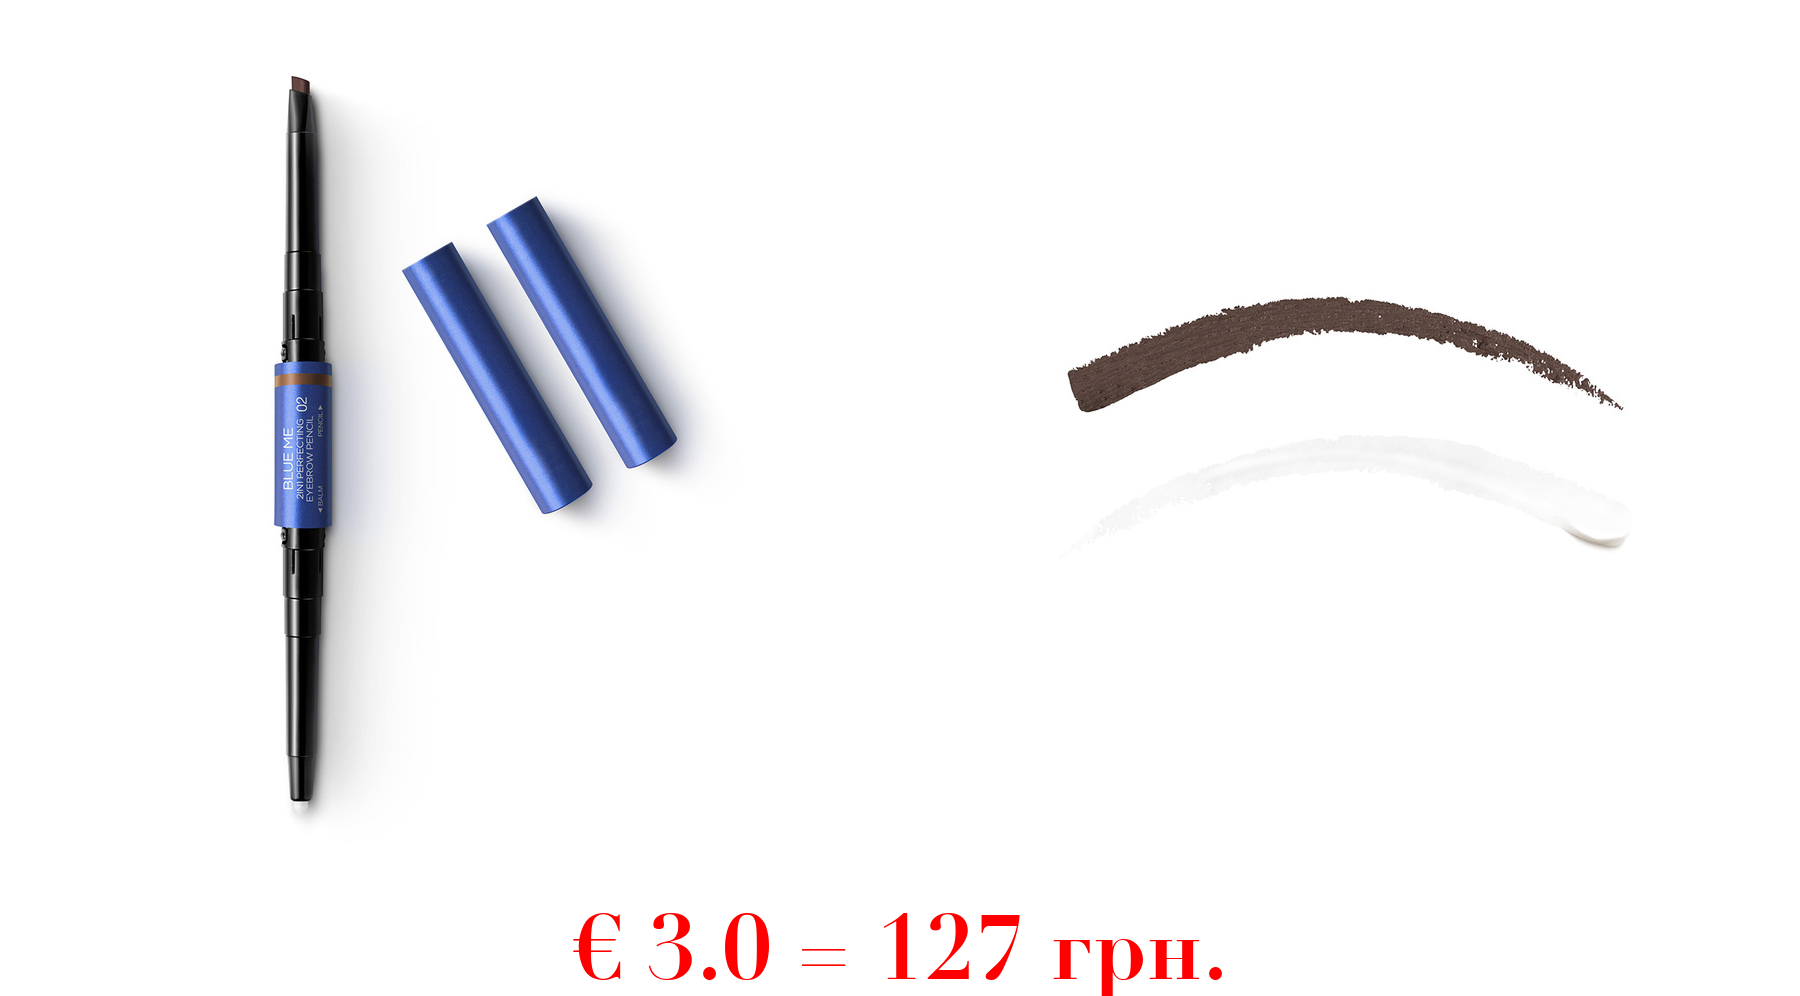 blue me 2-in-1 perfecting eyebrow pencil